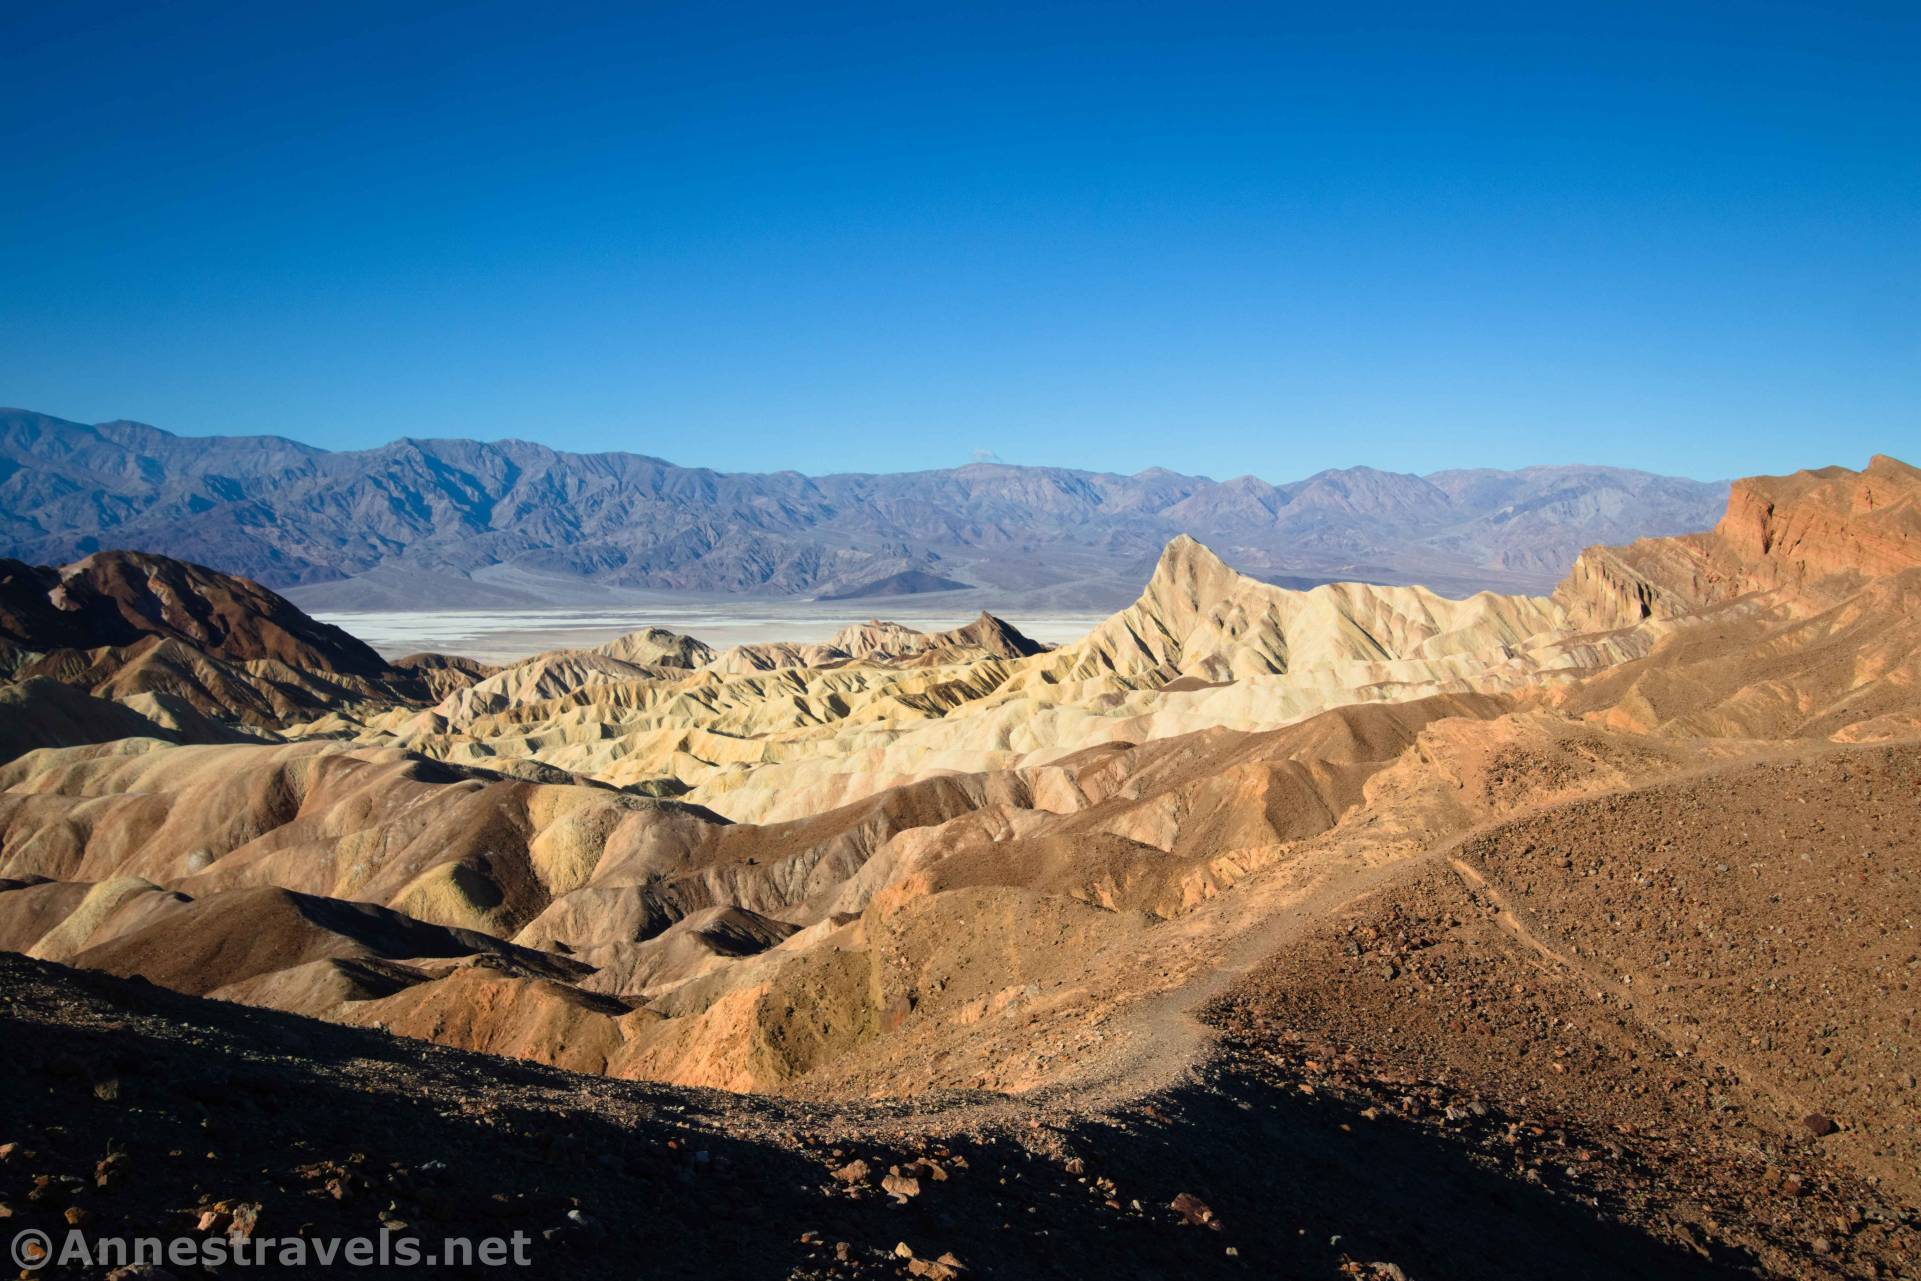 Atop the Red Cathedral Canyon Crest, Death Valley National Park, California